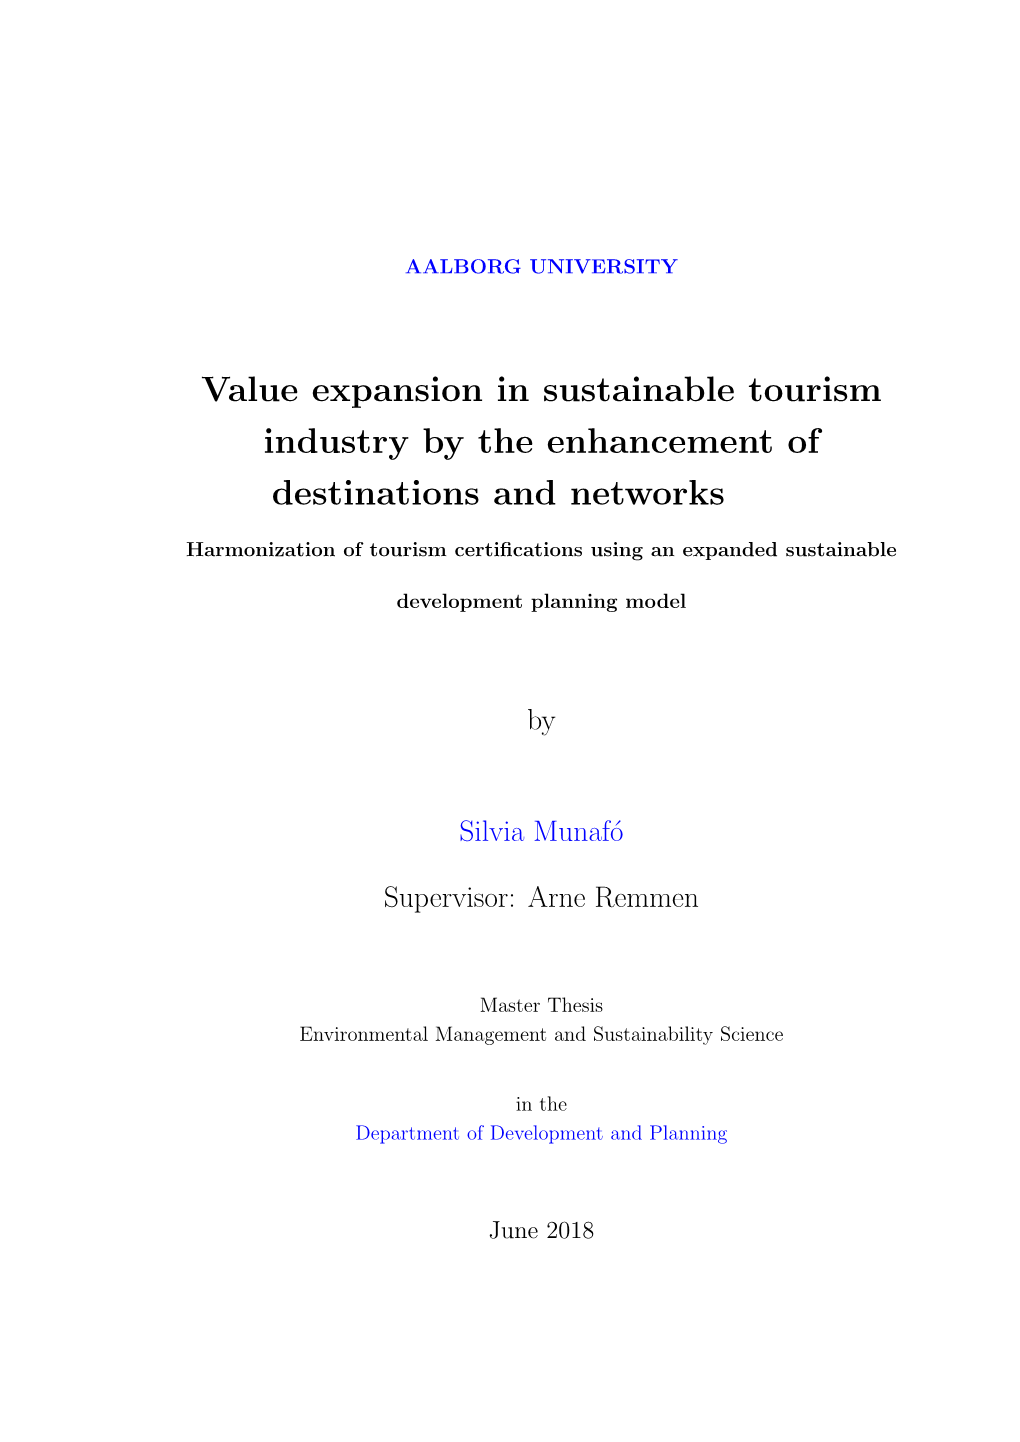 Value Expansion in Sustainable Tourism Industry by the Enhancement of Destinations and Networks